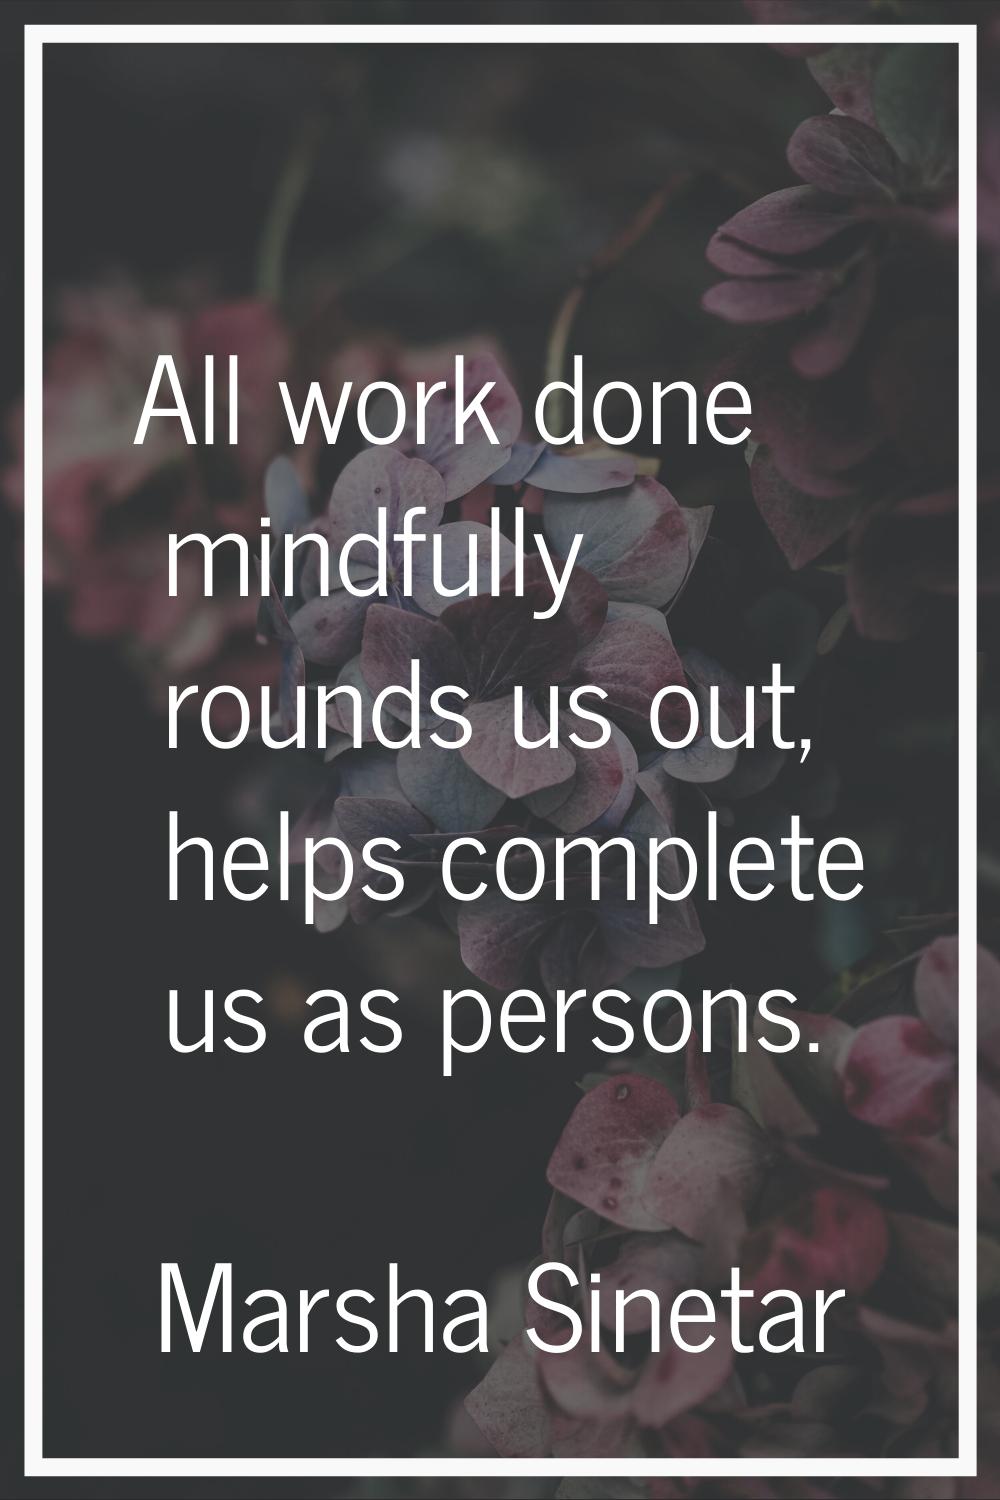 All work done mindfully rounds us out, helps complete us as persons.